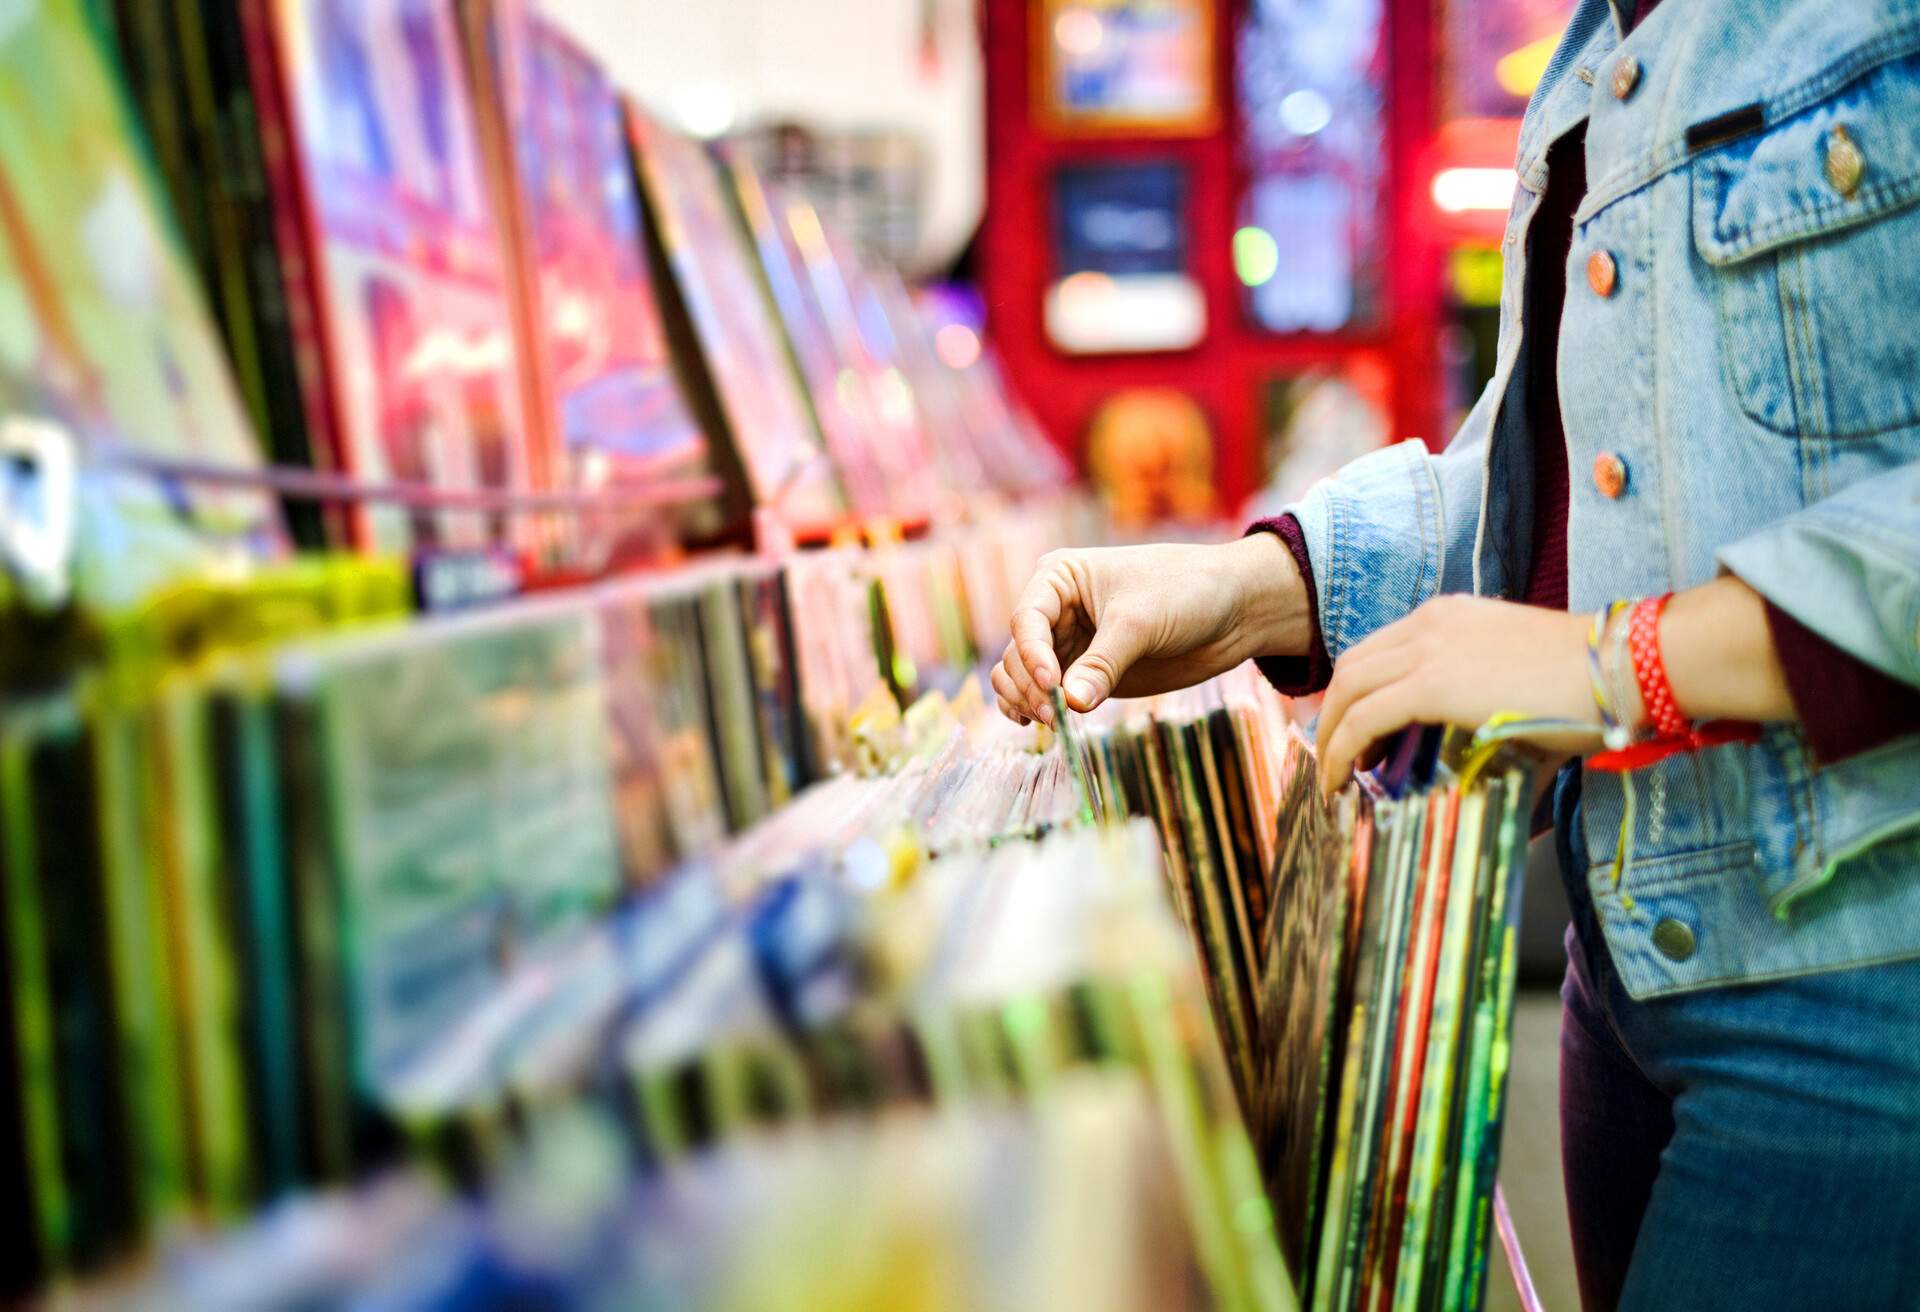 THEME_SHOPPING_VINYL_RECORDS_GettyImages-1226914373